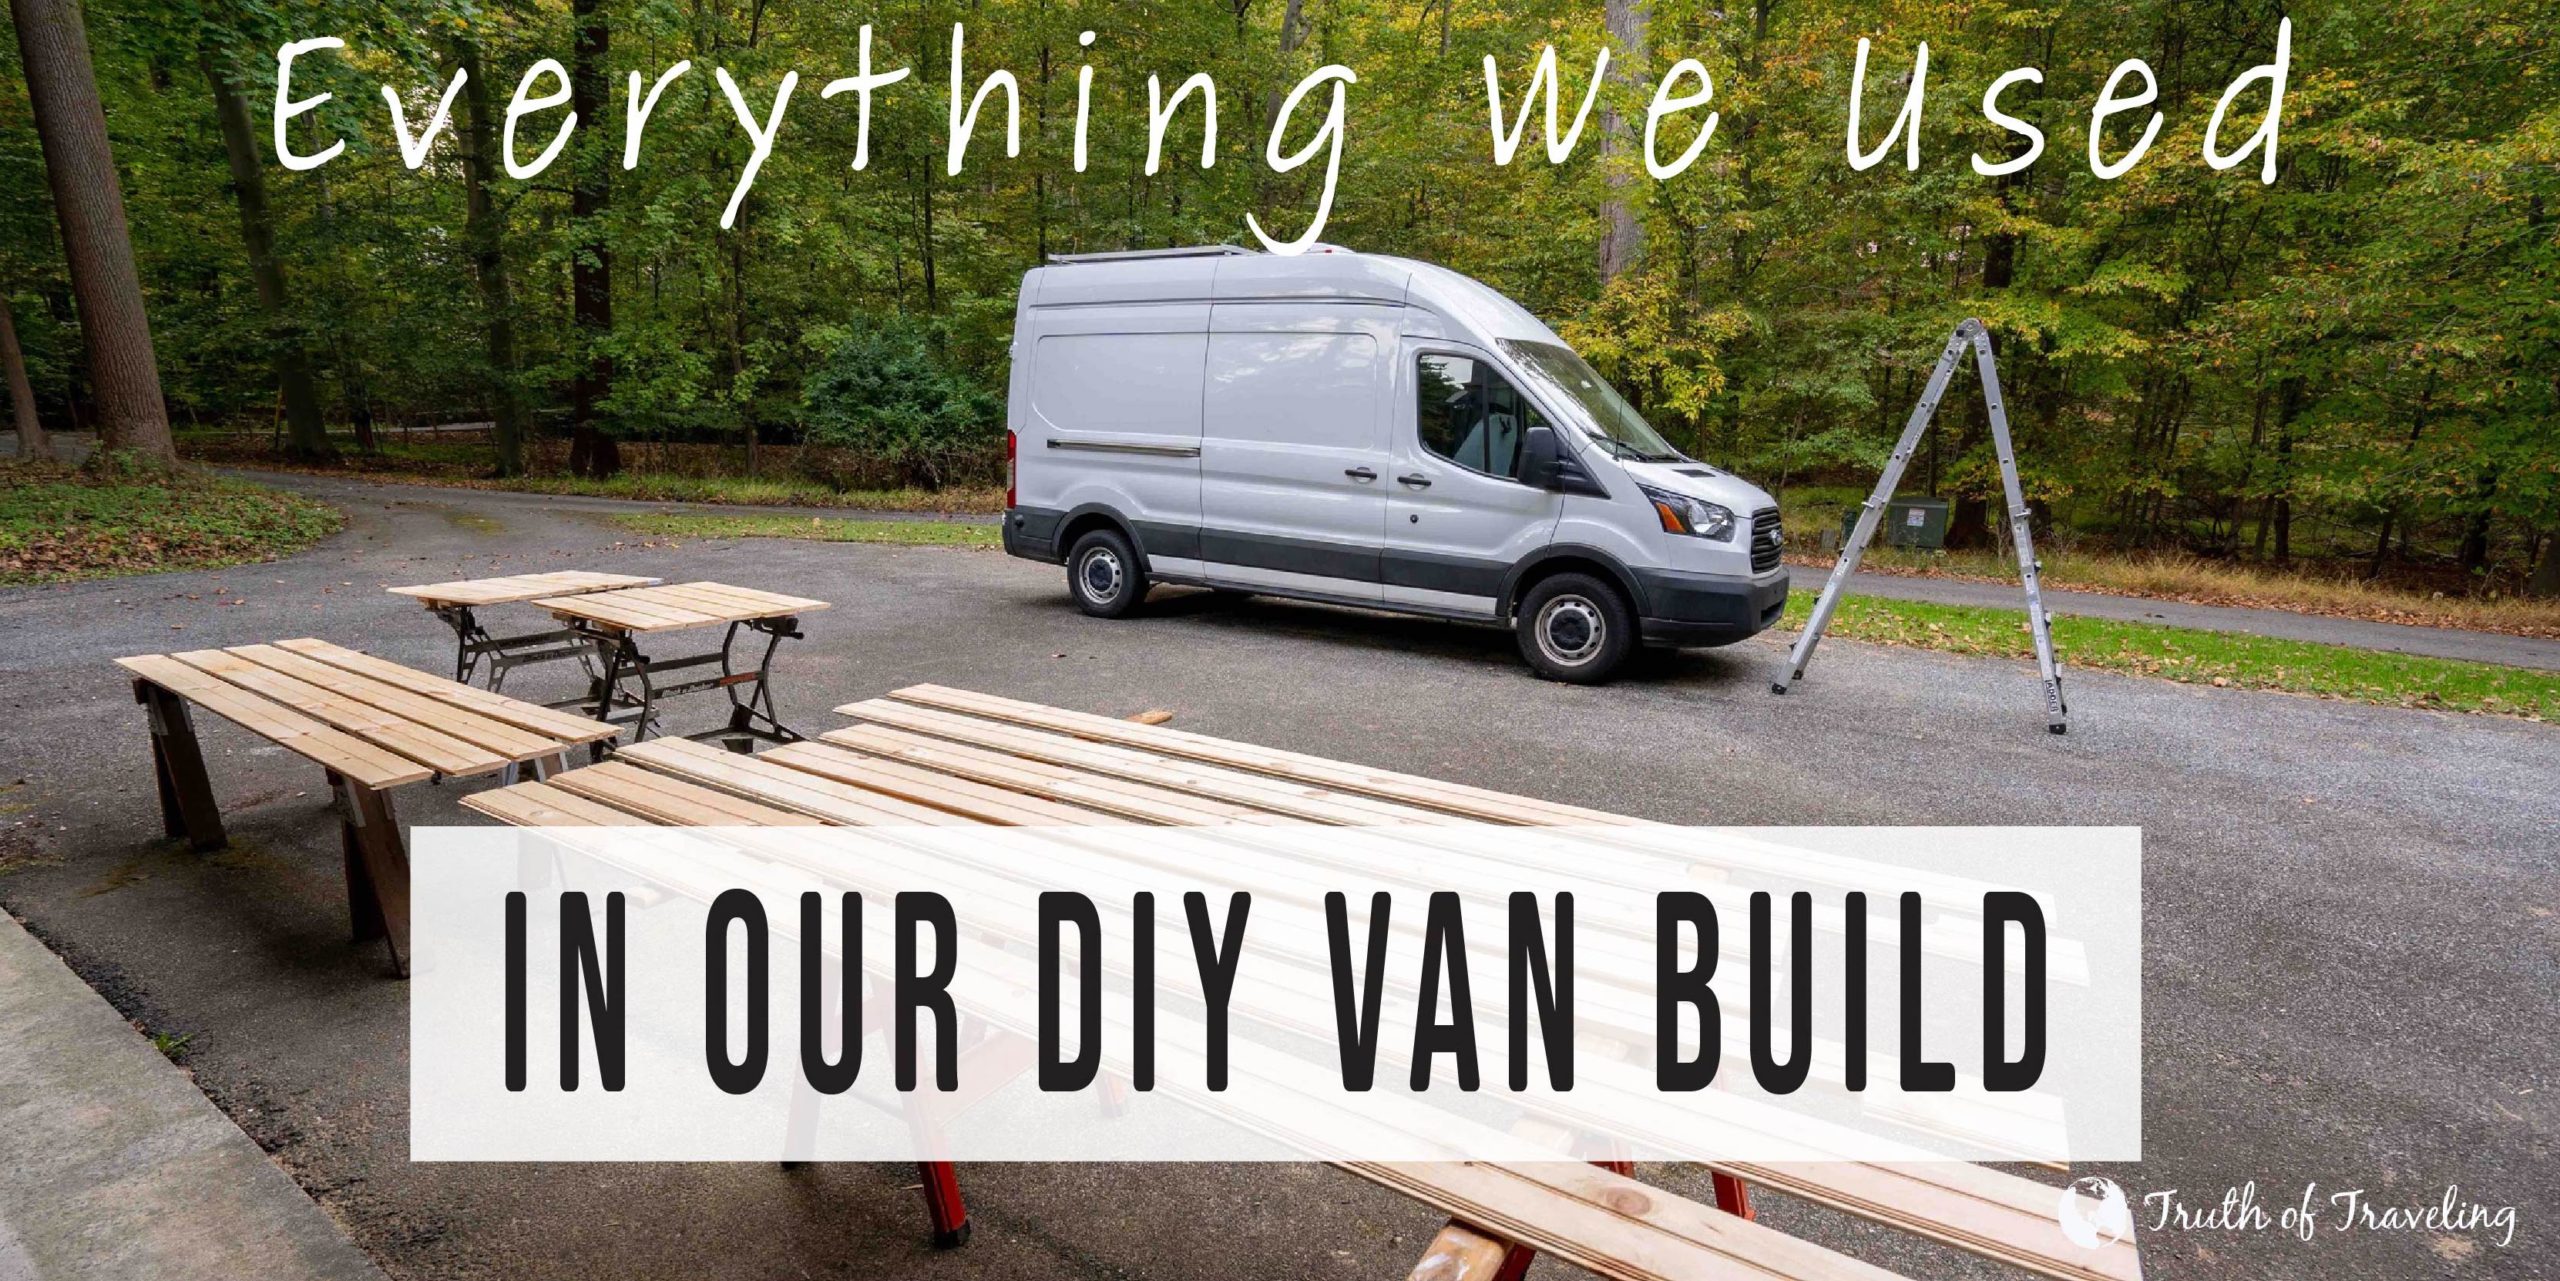 Everything we used in our DIY van build graphic